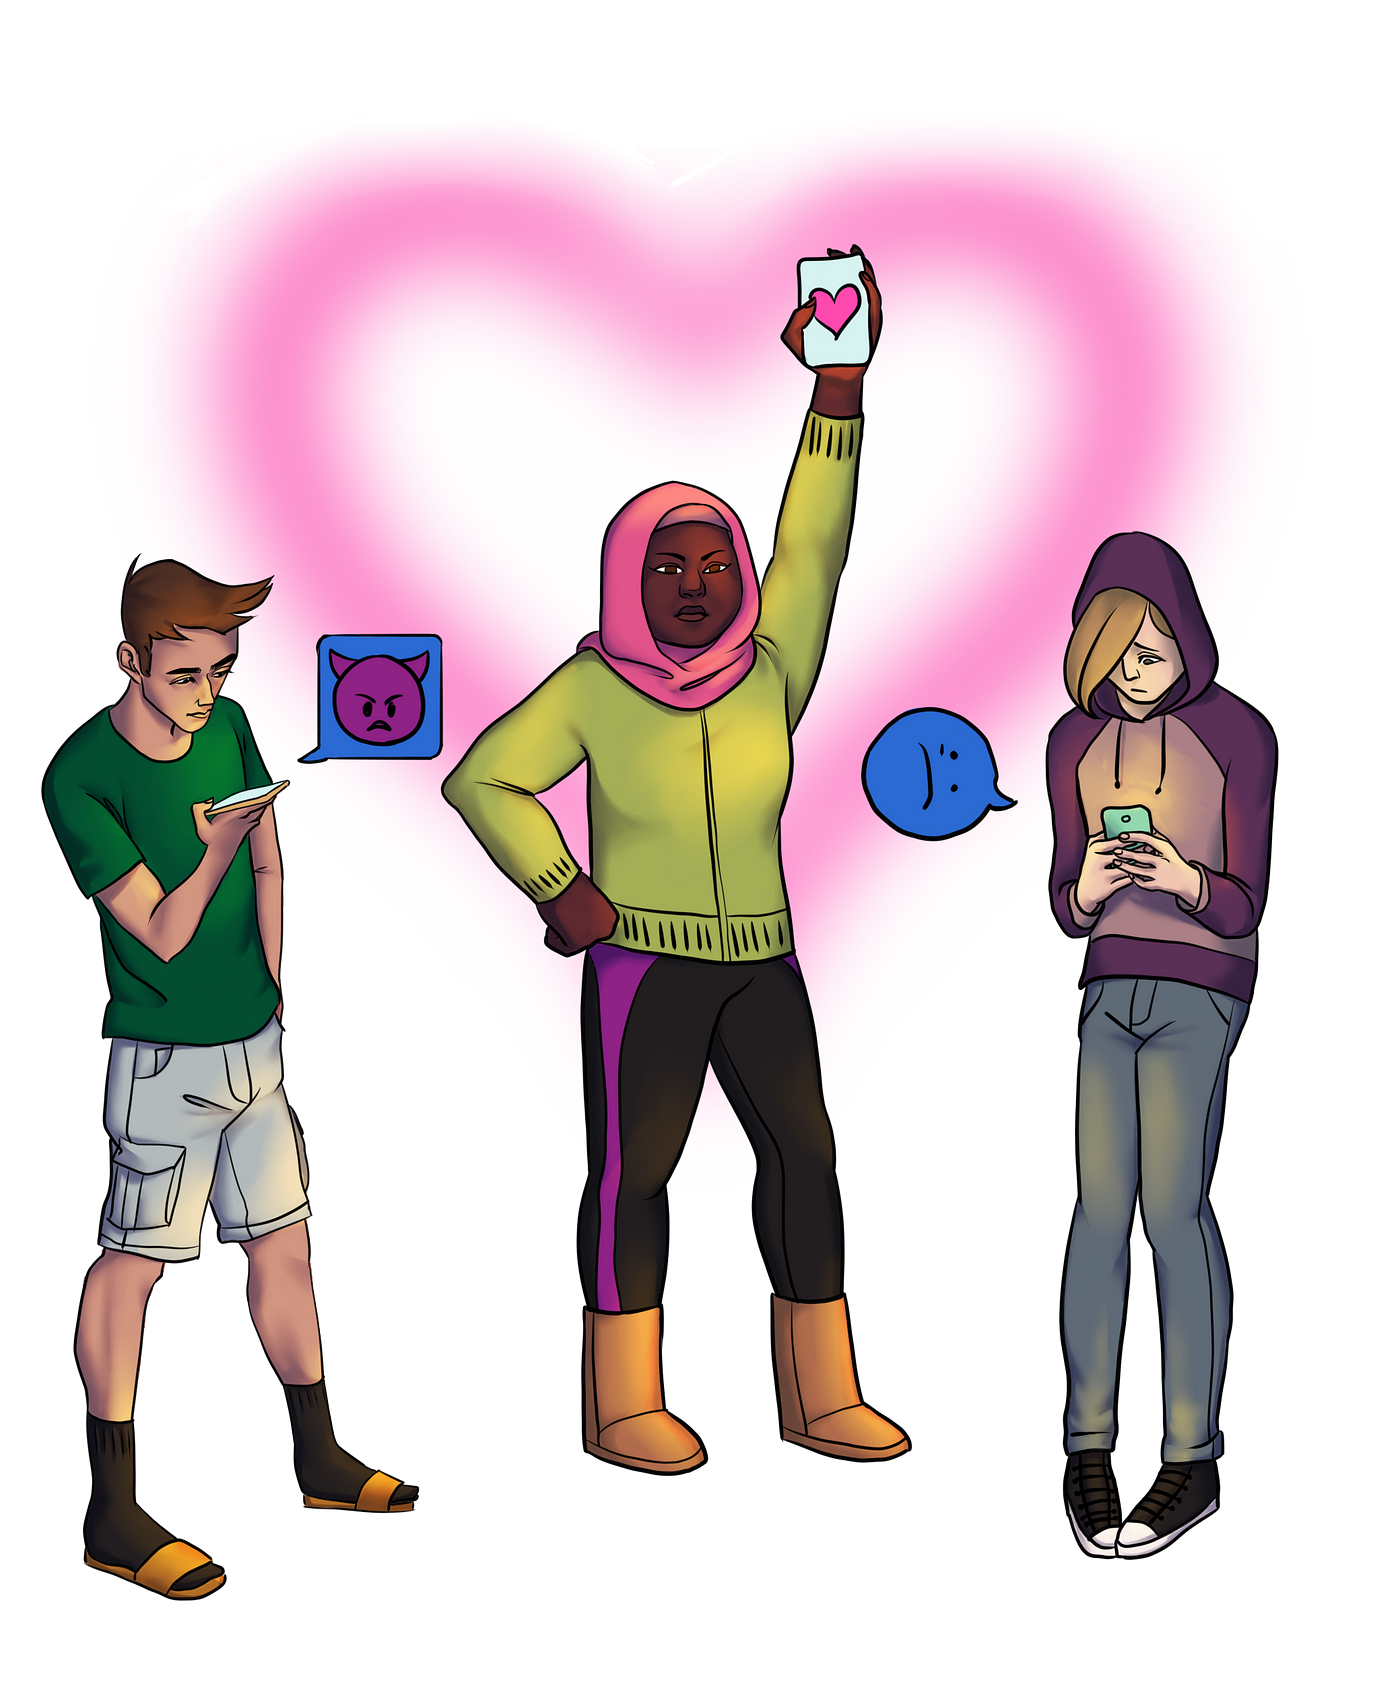 Illustration of three young people on mobile phones